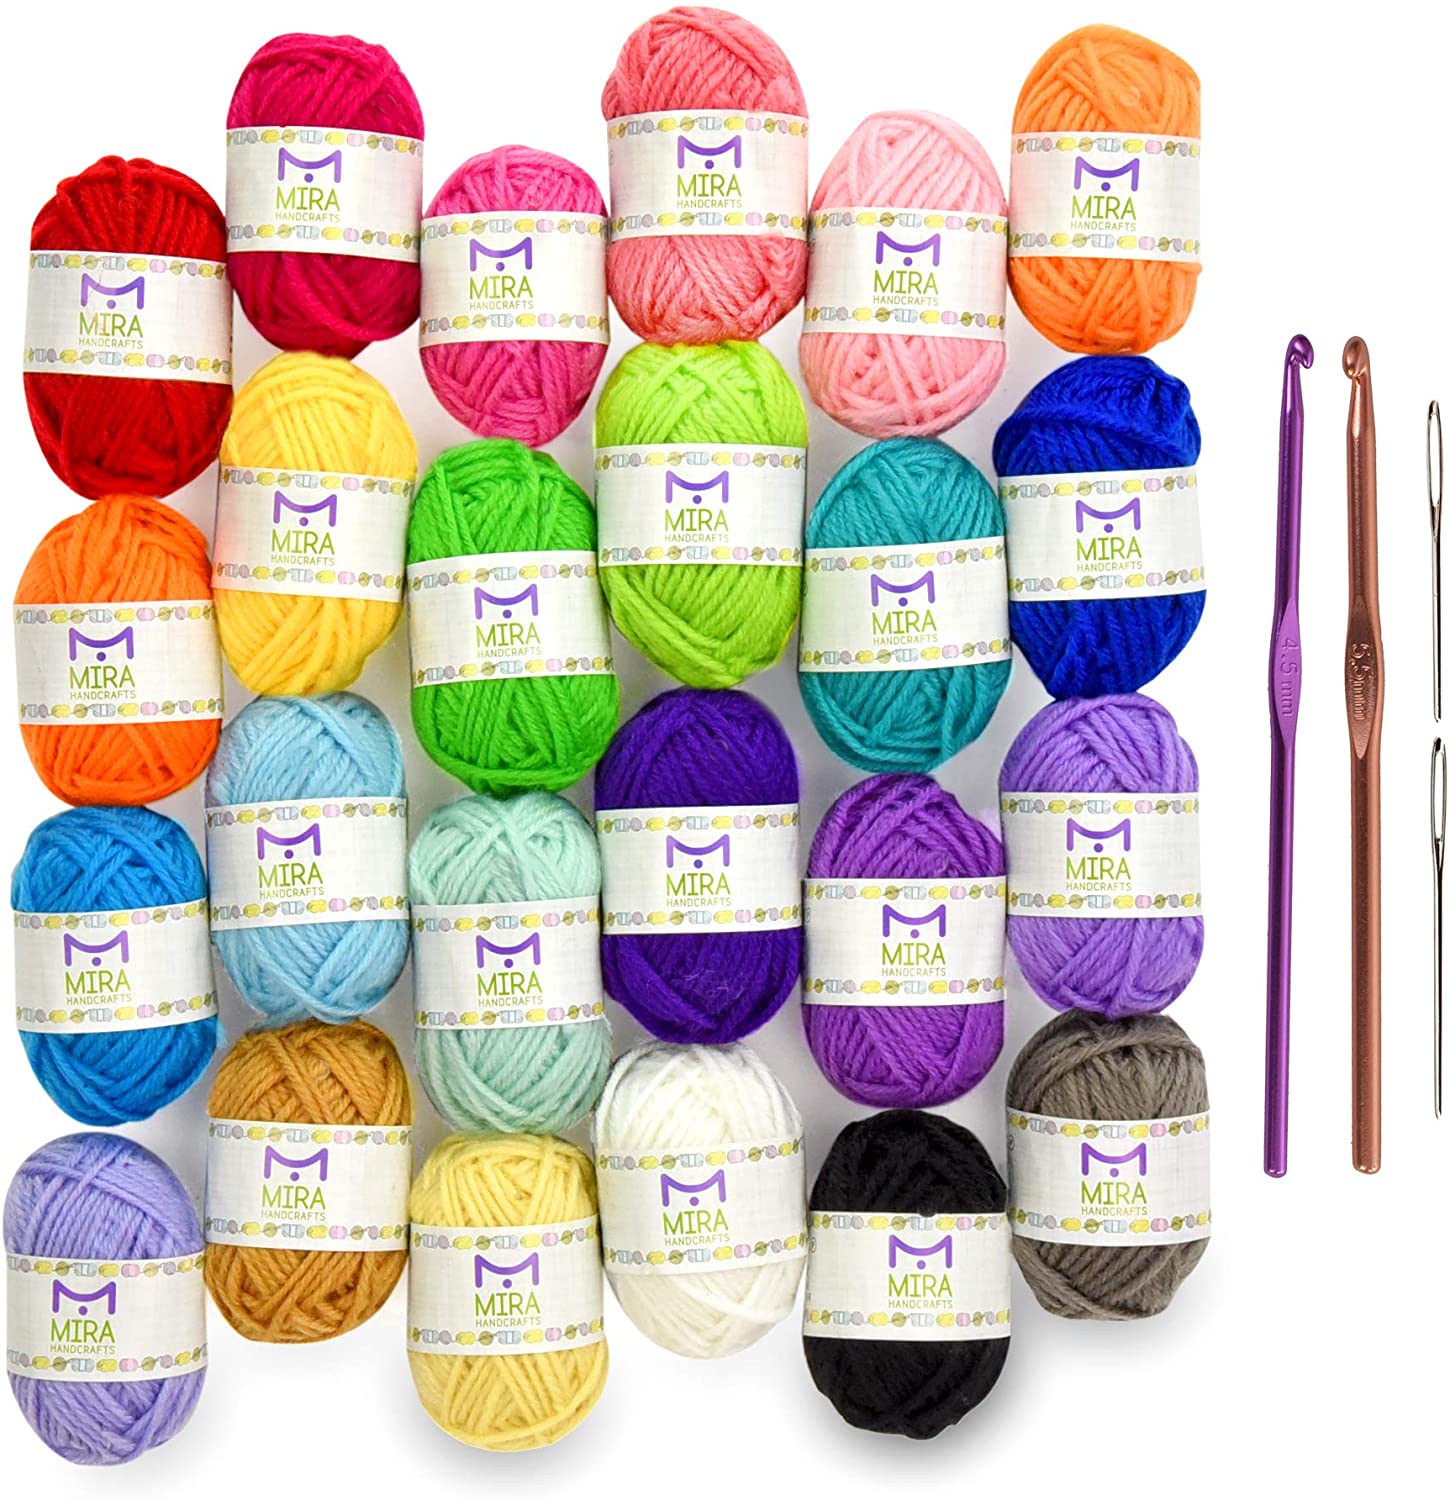 Temperature Blankets Record The Weather Each Day Of The Year In Different Yarn Color